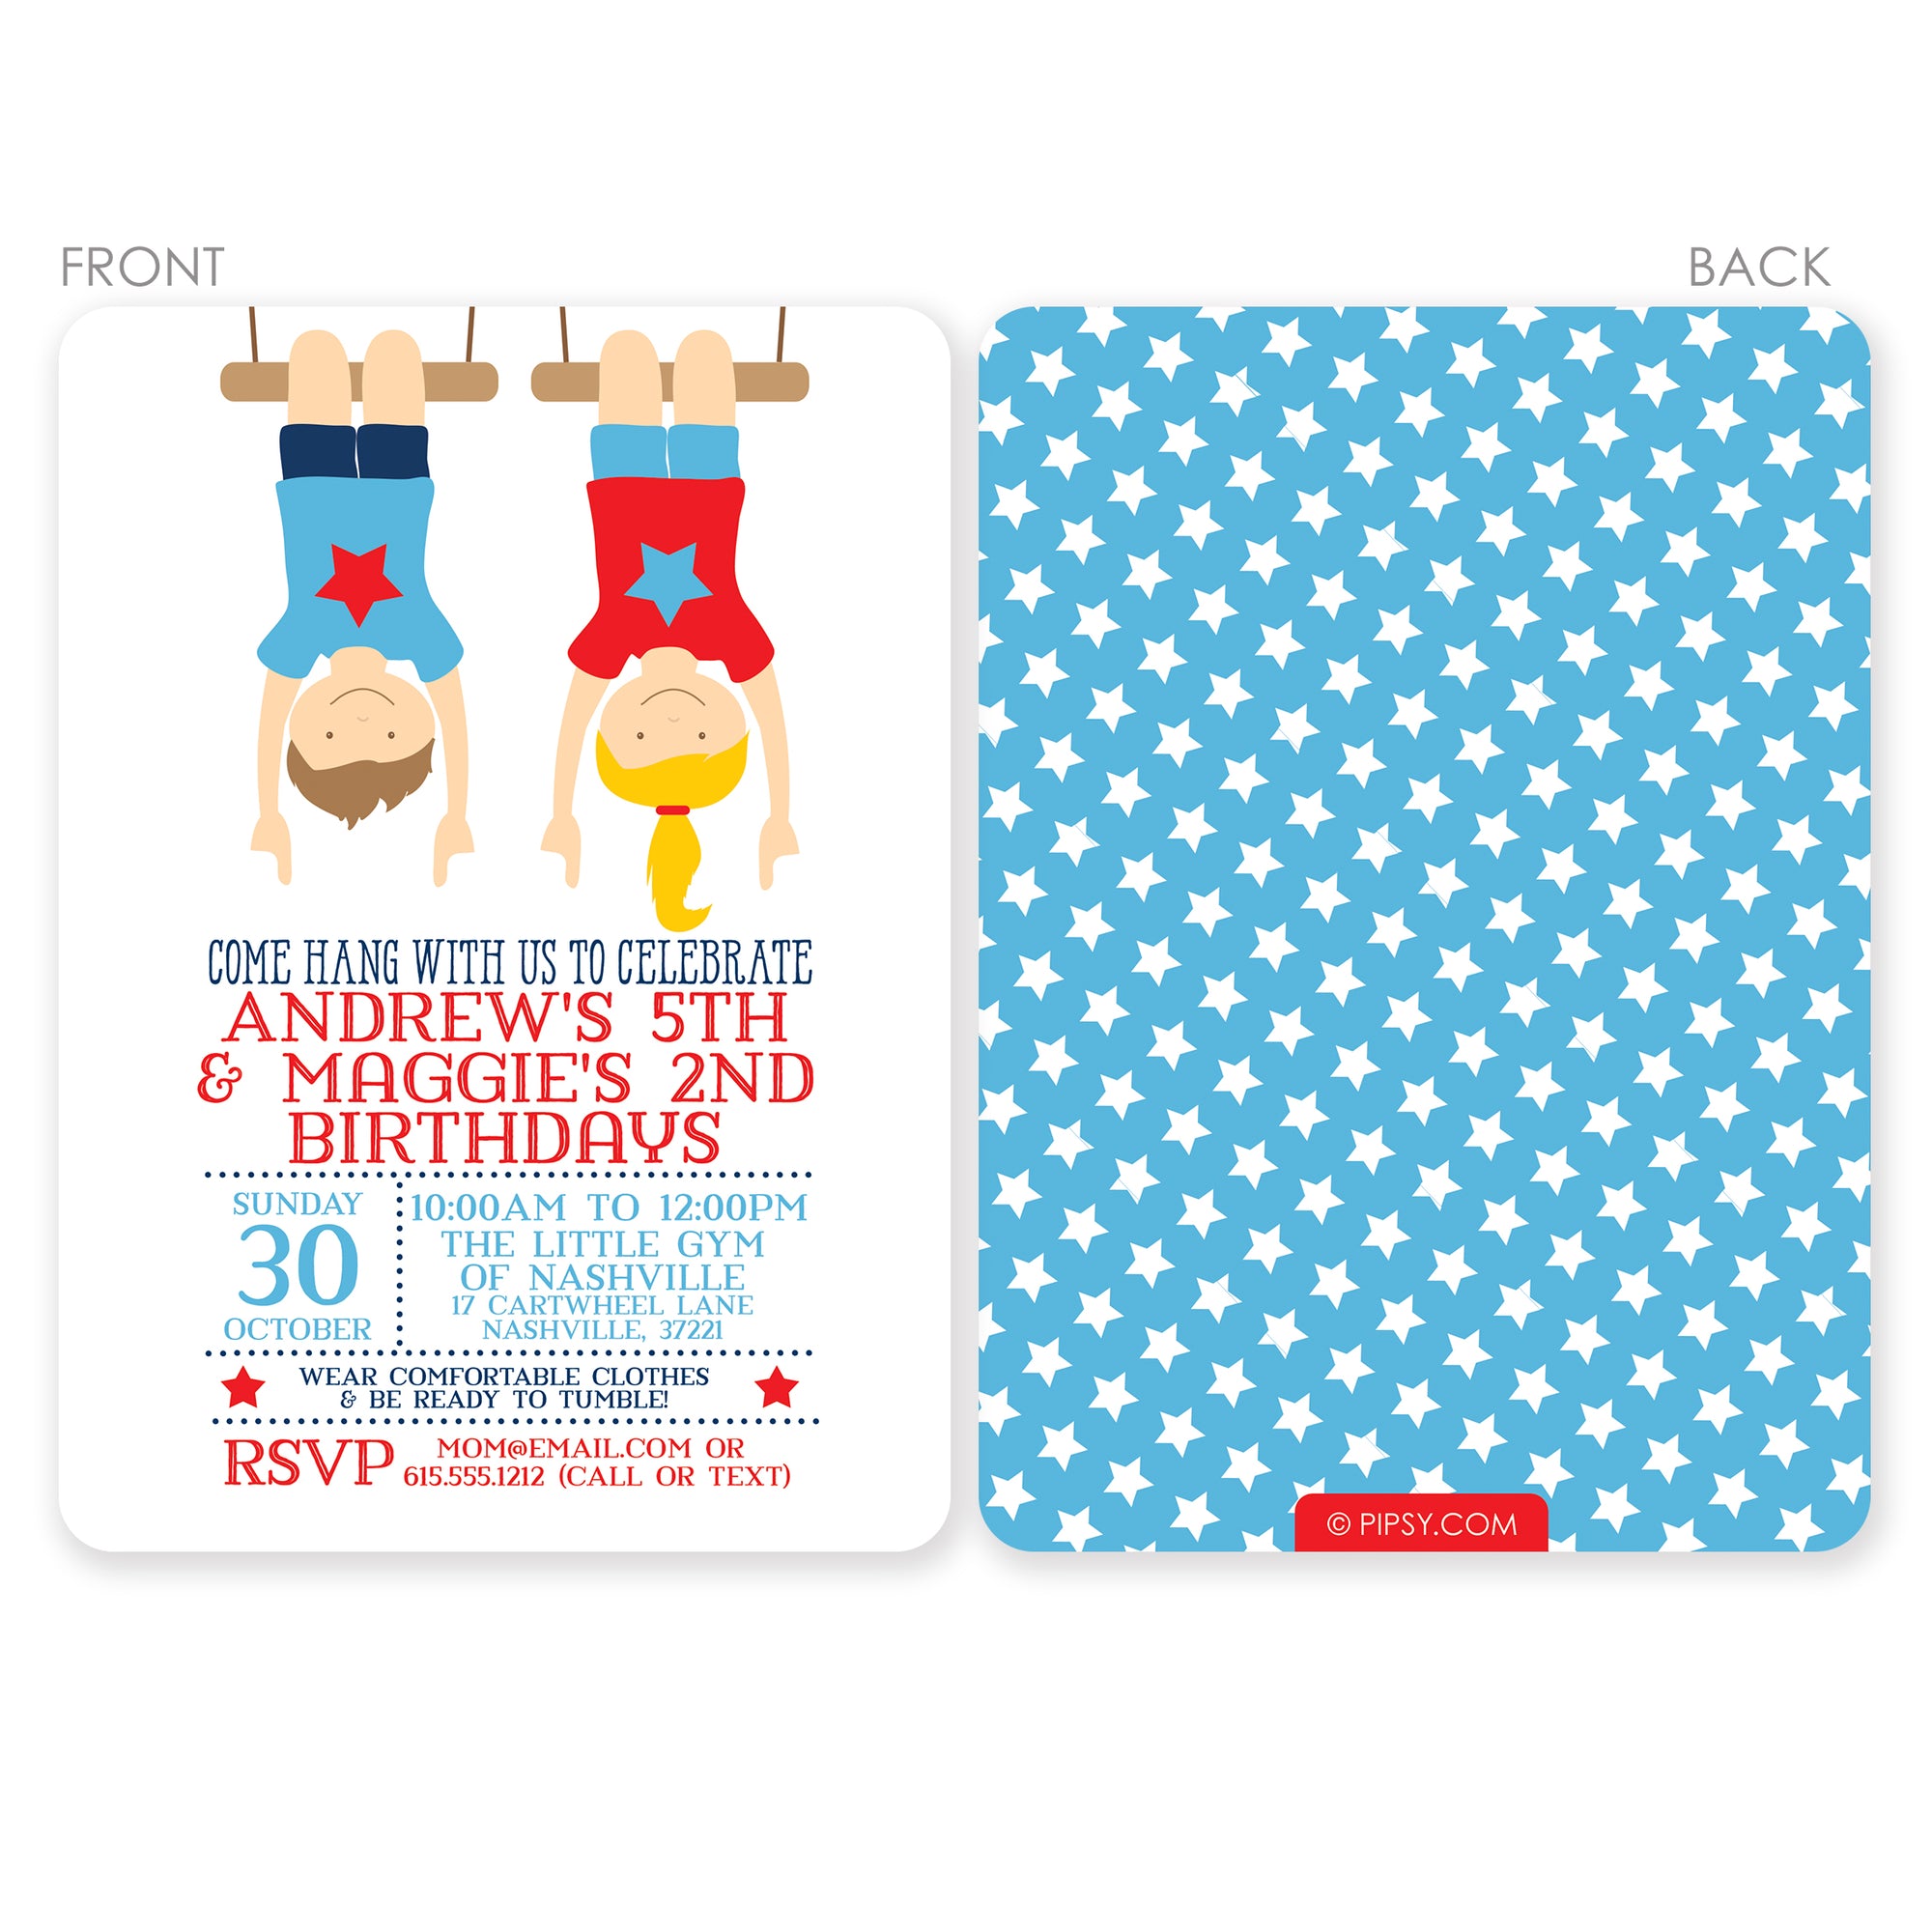 This gymnastics-themed birthday party invitation is perfect for celebrating a party for twins, siblings, or even best friends. Printed on luxurious cardstock, it can be customized with your choice of colors, for a truly unique look. We can adjust eye, hair, and skin color upon request, front and back view